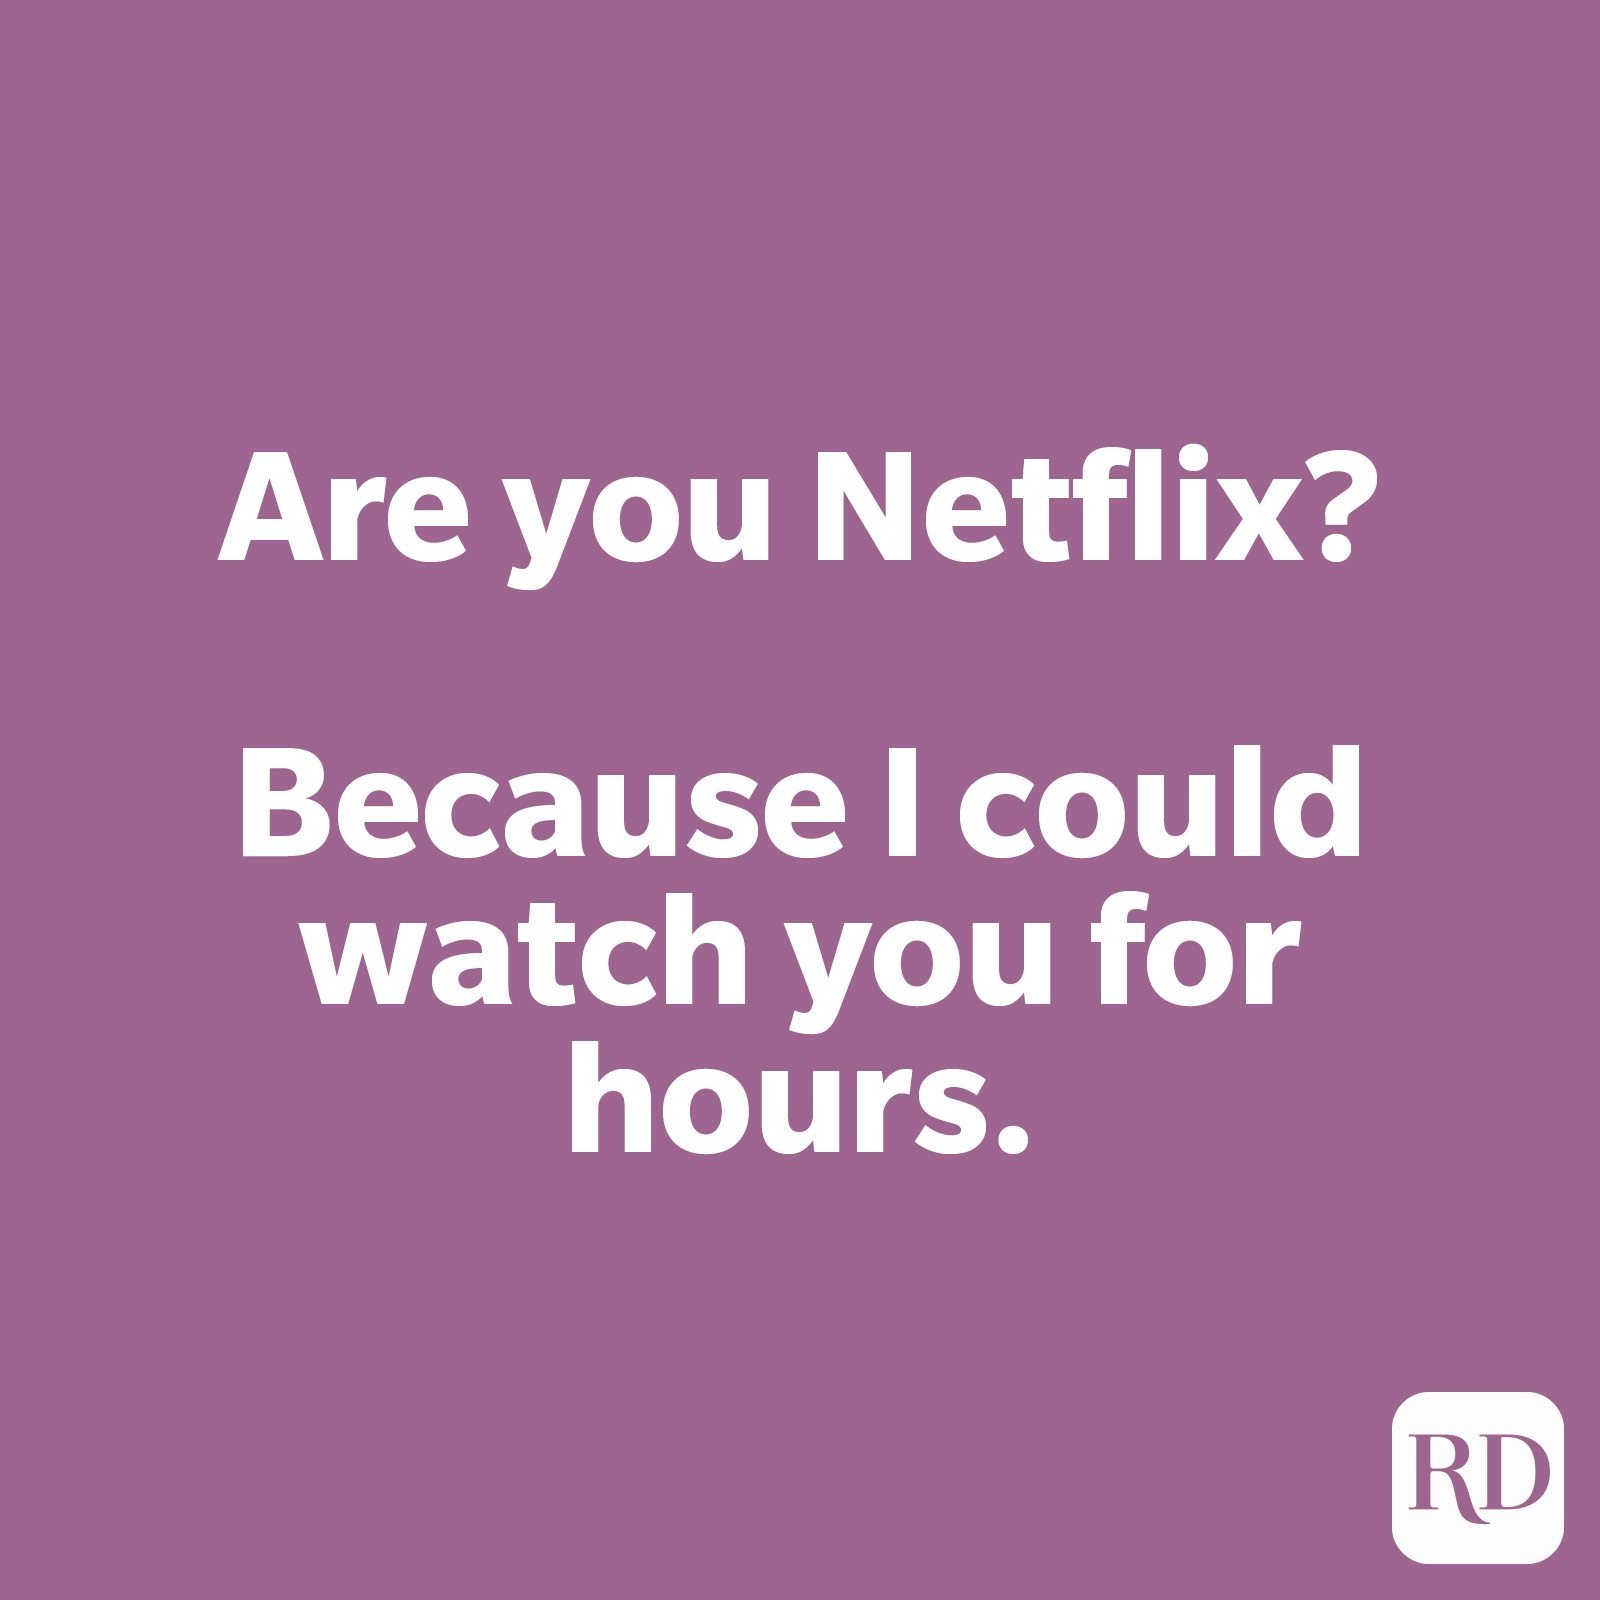 Are you Netflix? Because I could watch you for hours.